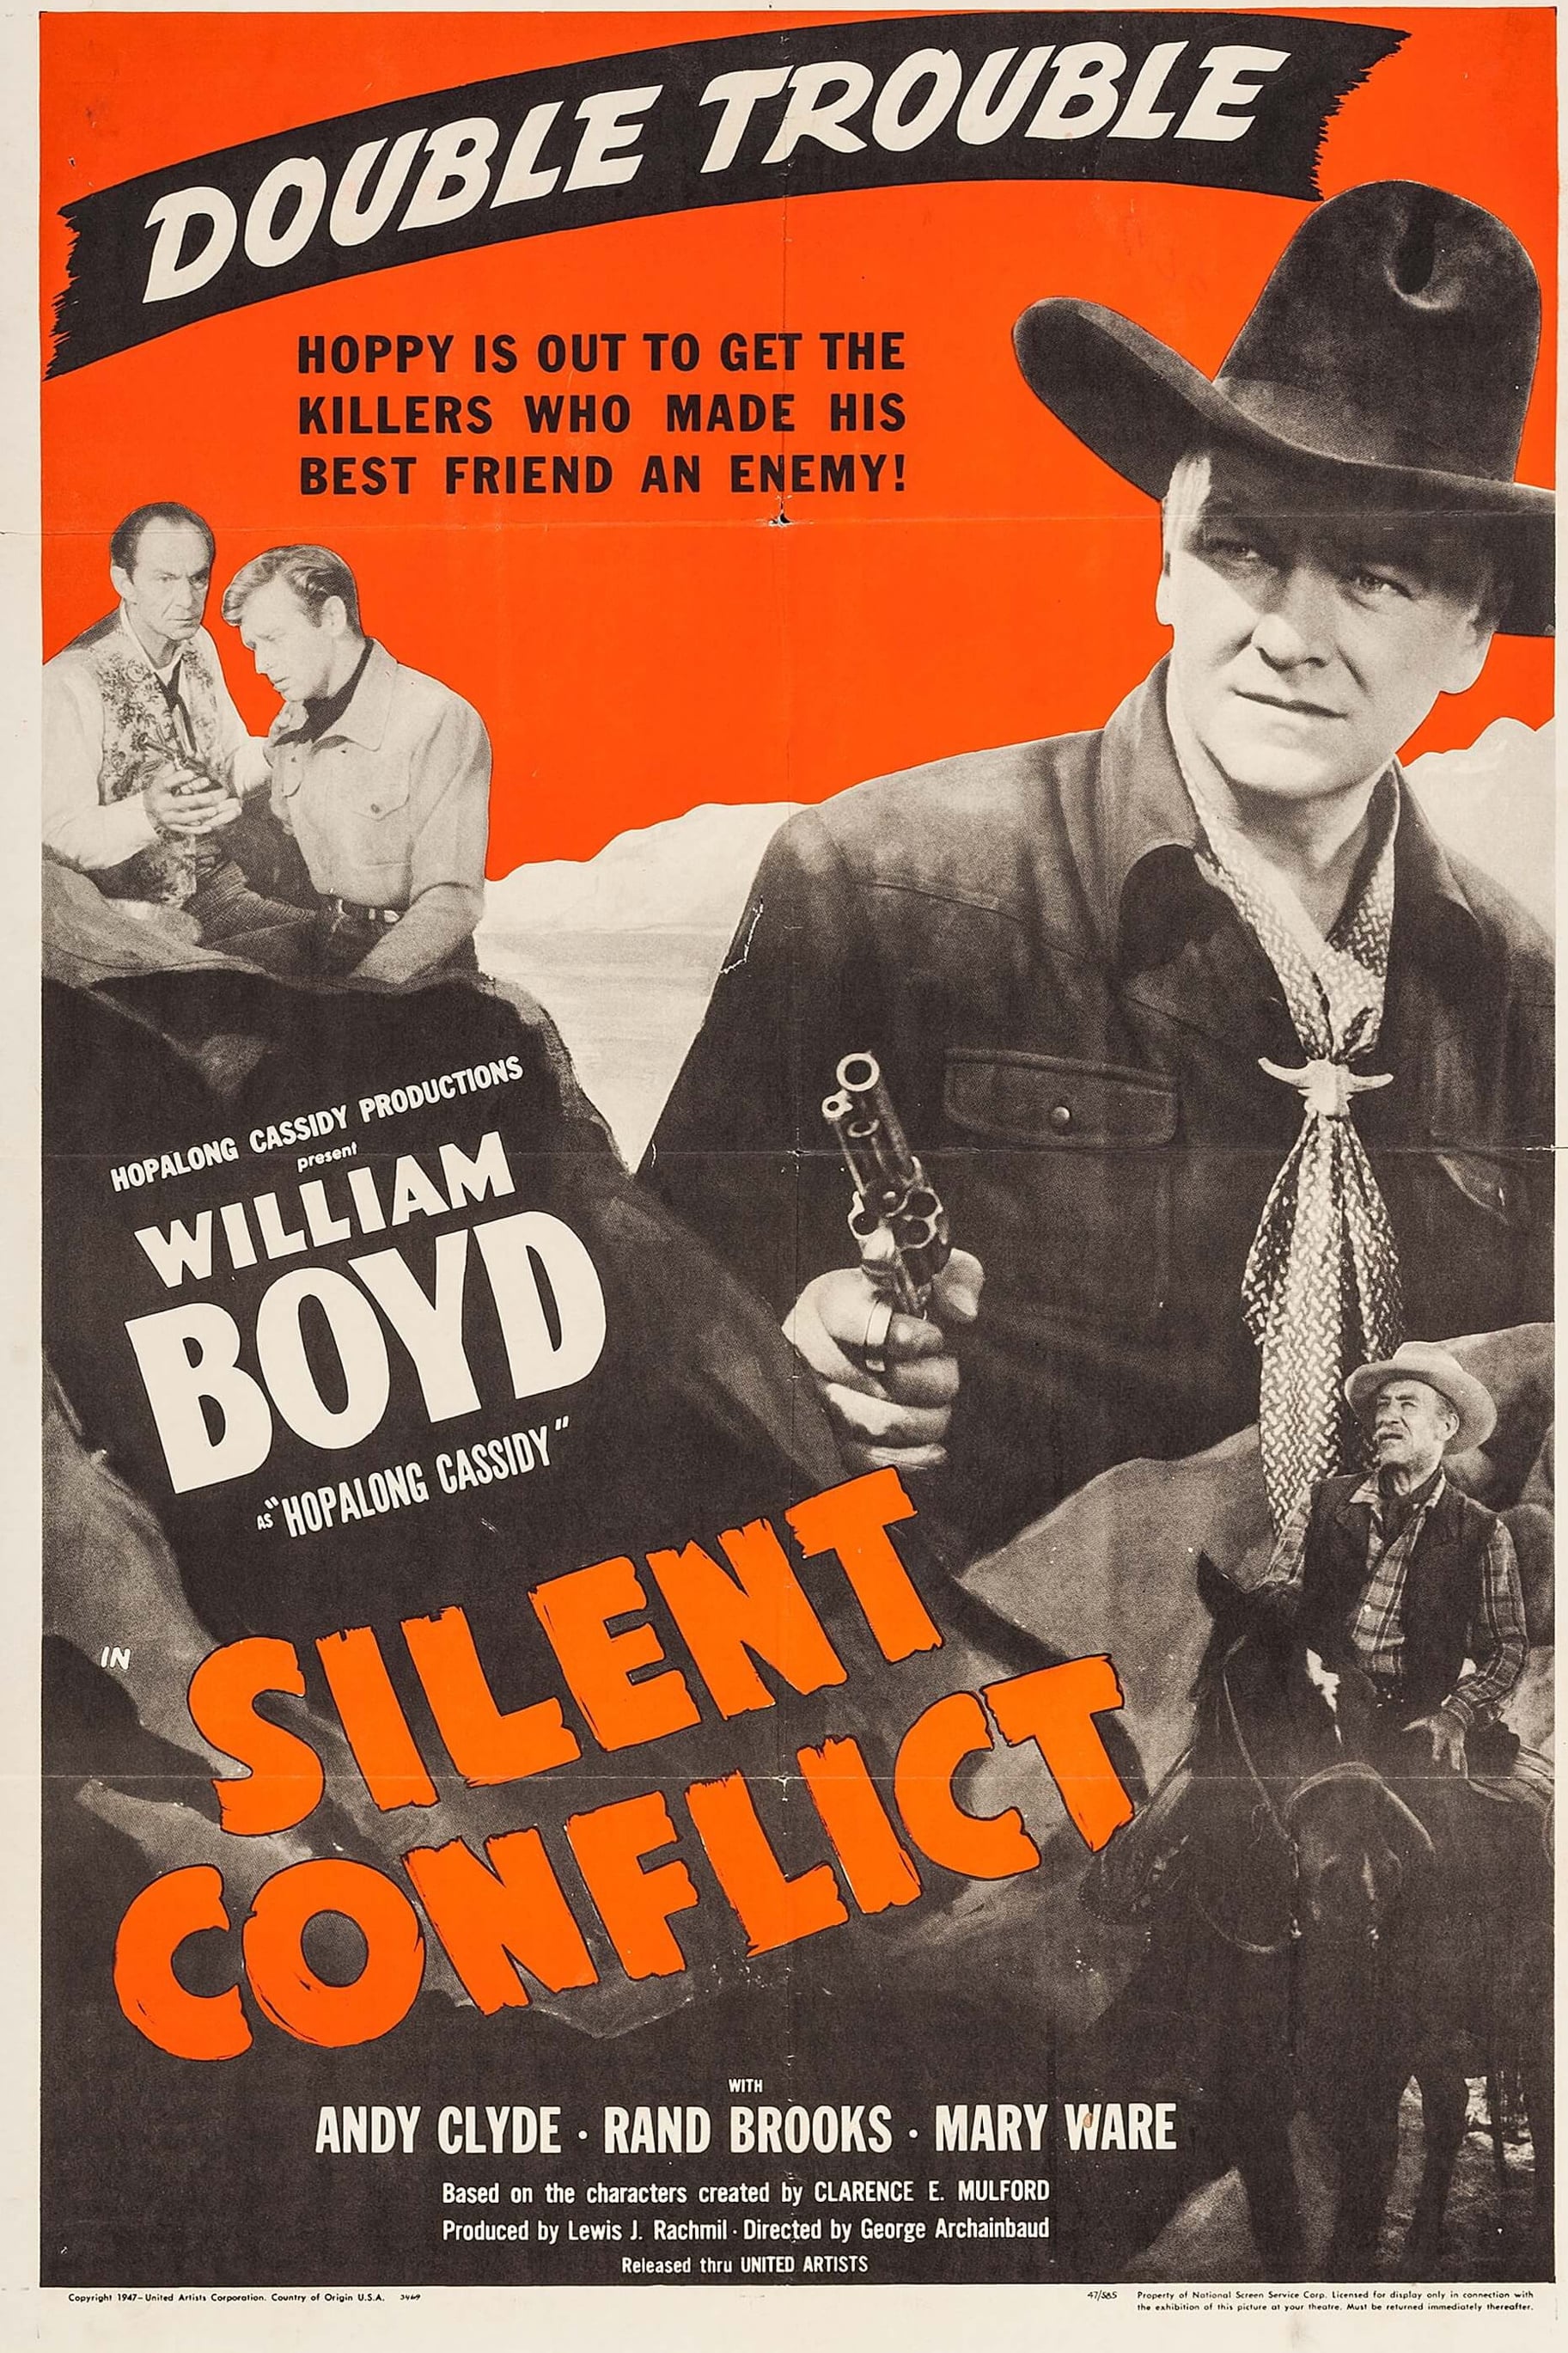 Silent Conflict (1948)